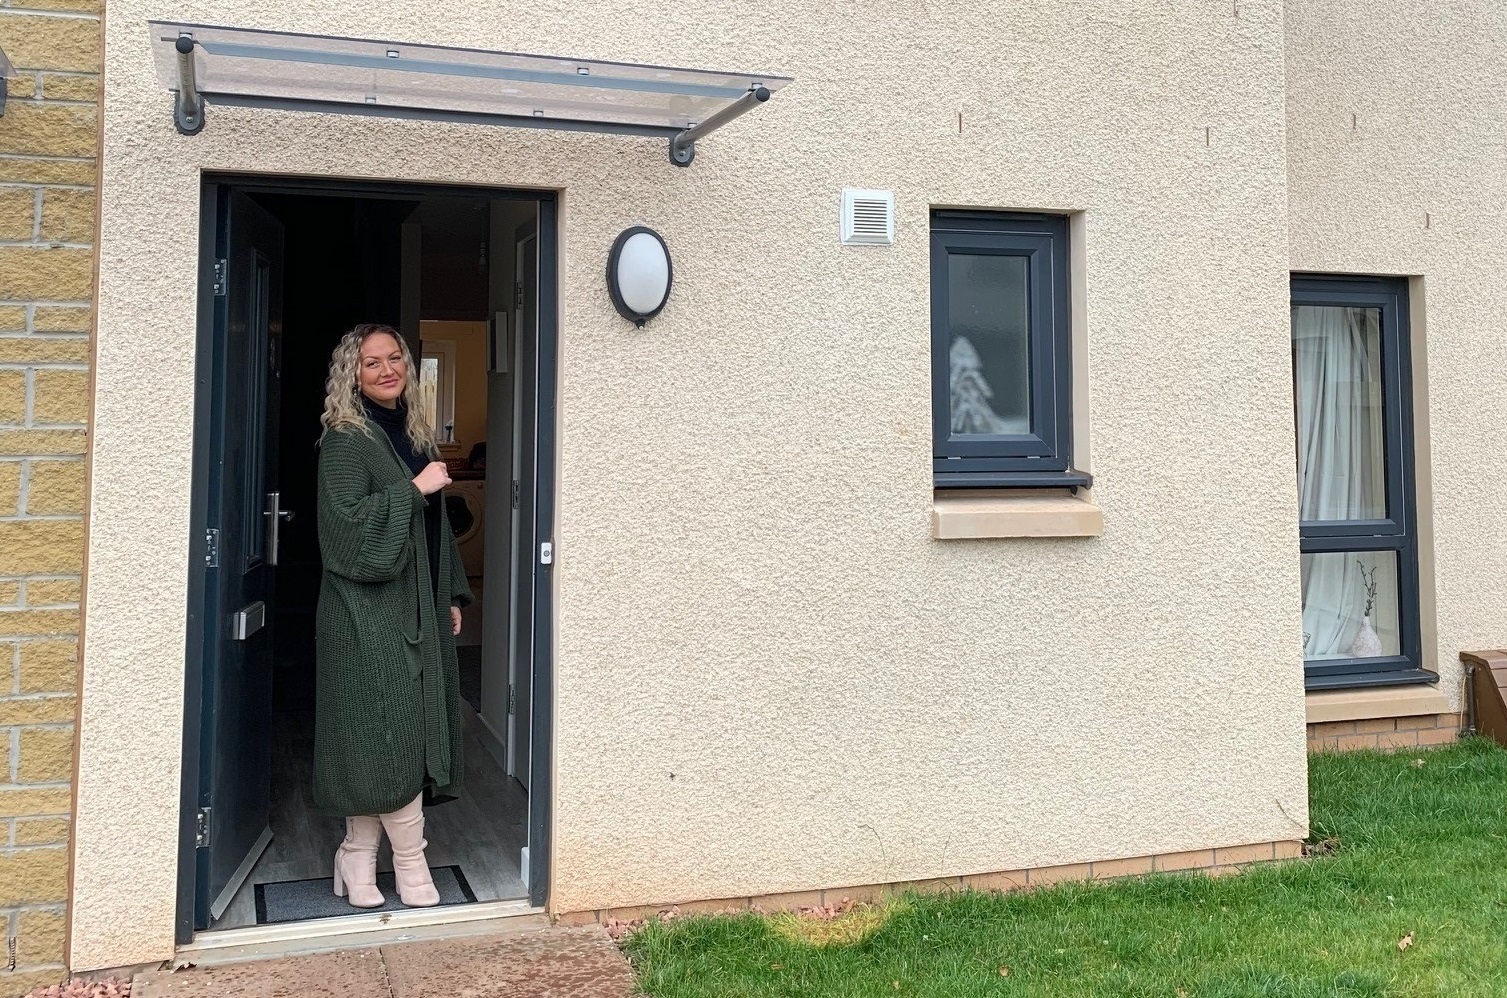 New affordable homes available across East Lothian